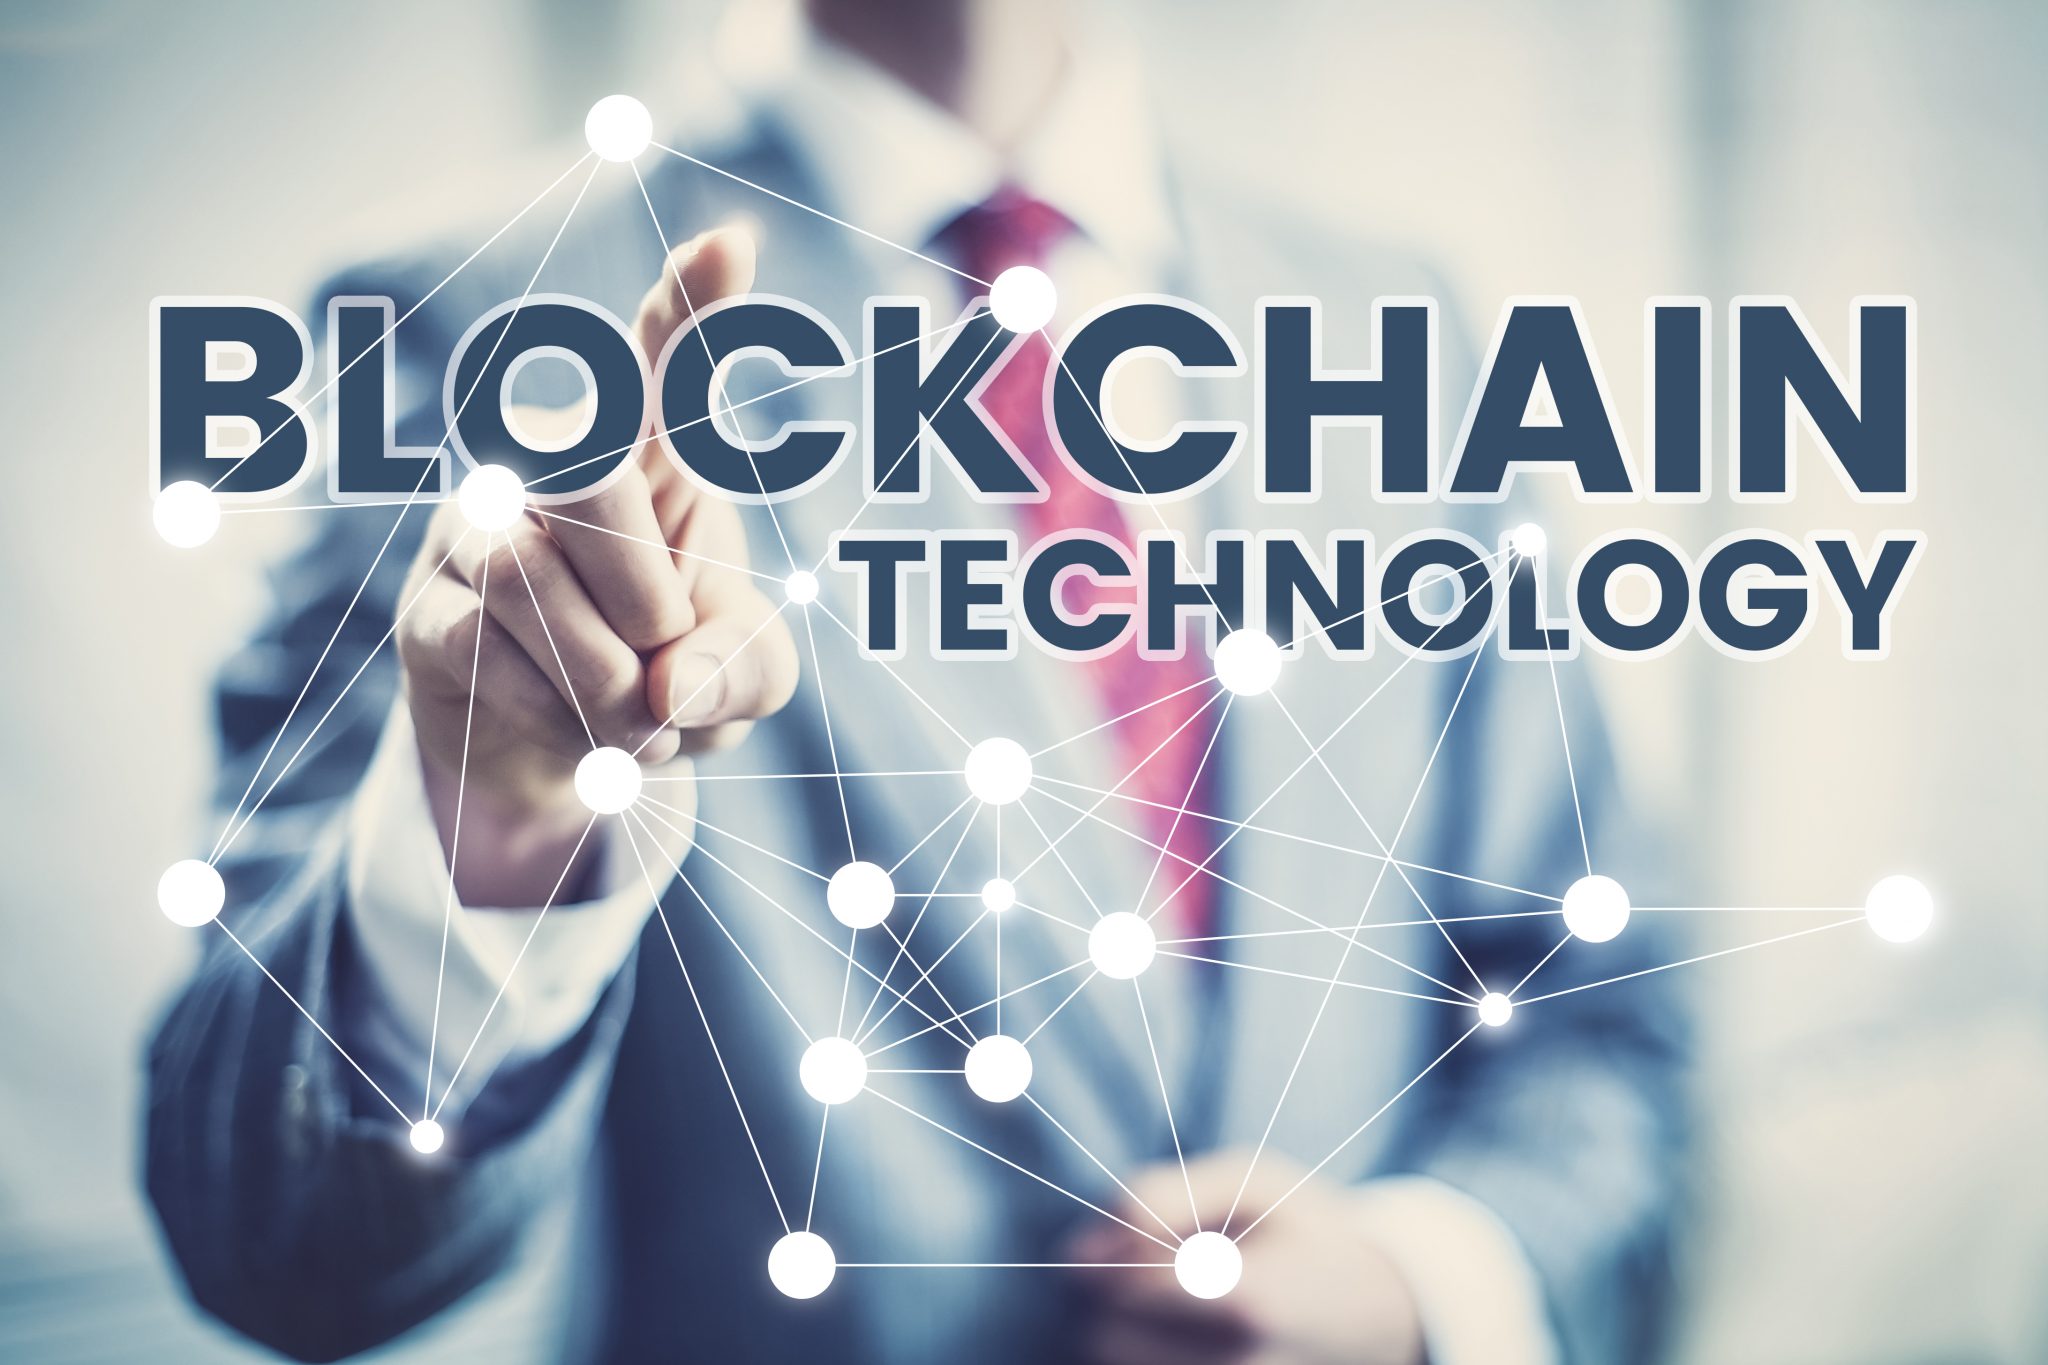 The concept of blockchain technology